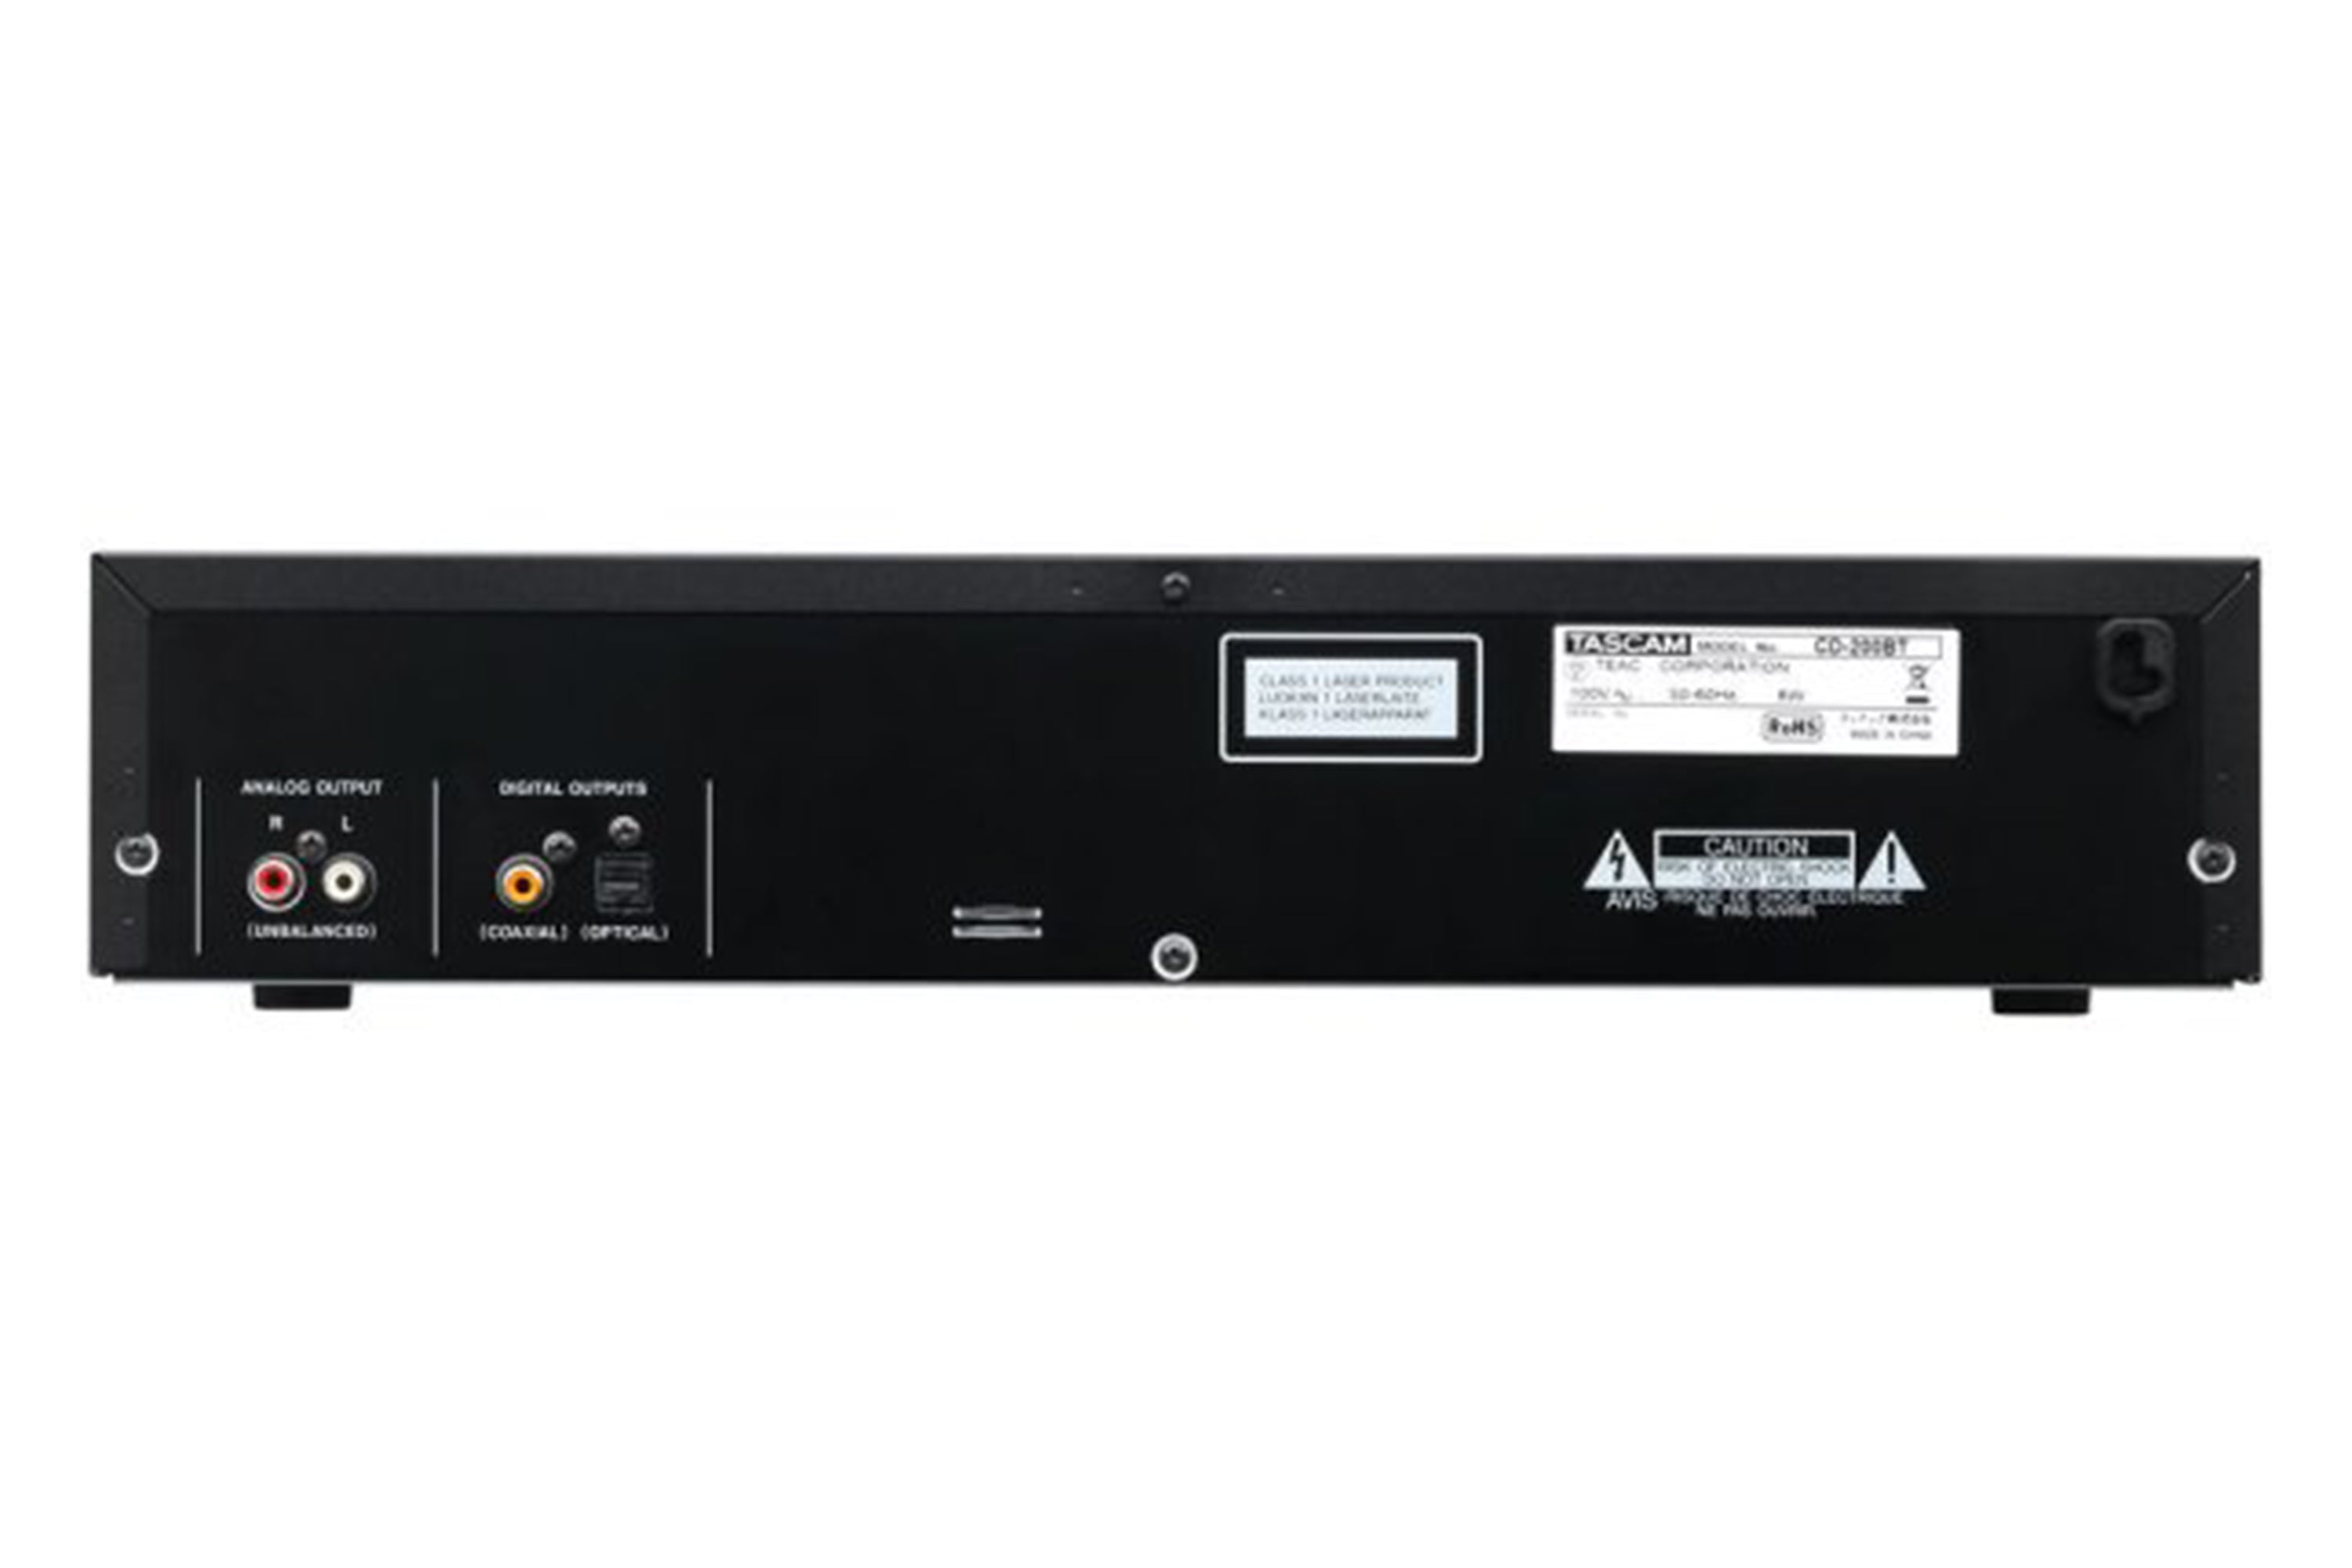 Tascam CD-200BT CD Player with Bluetooth